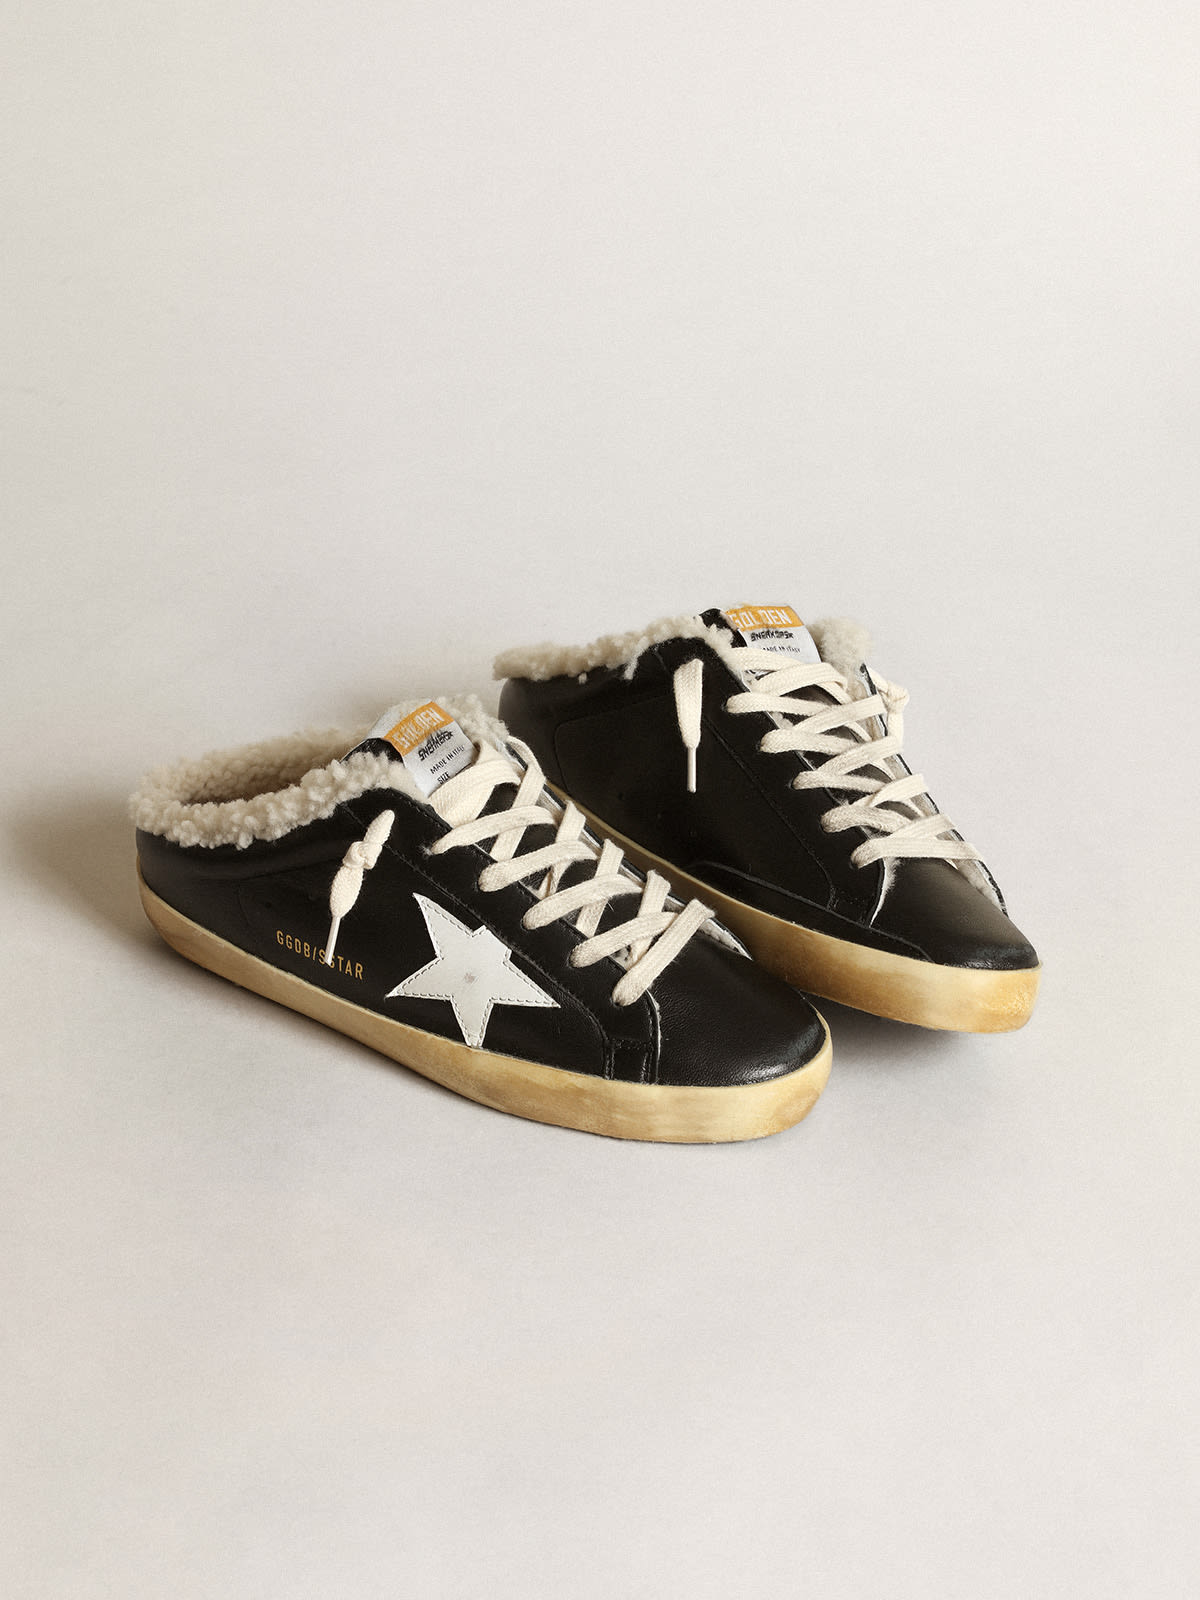 Super-Star Sabots in black nappa leather with white leather star and beige shearling  lining | Golden Goose